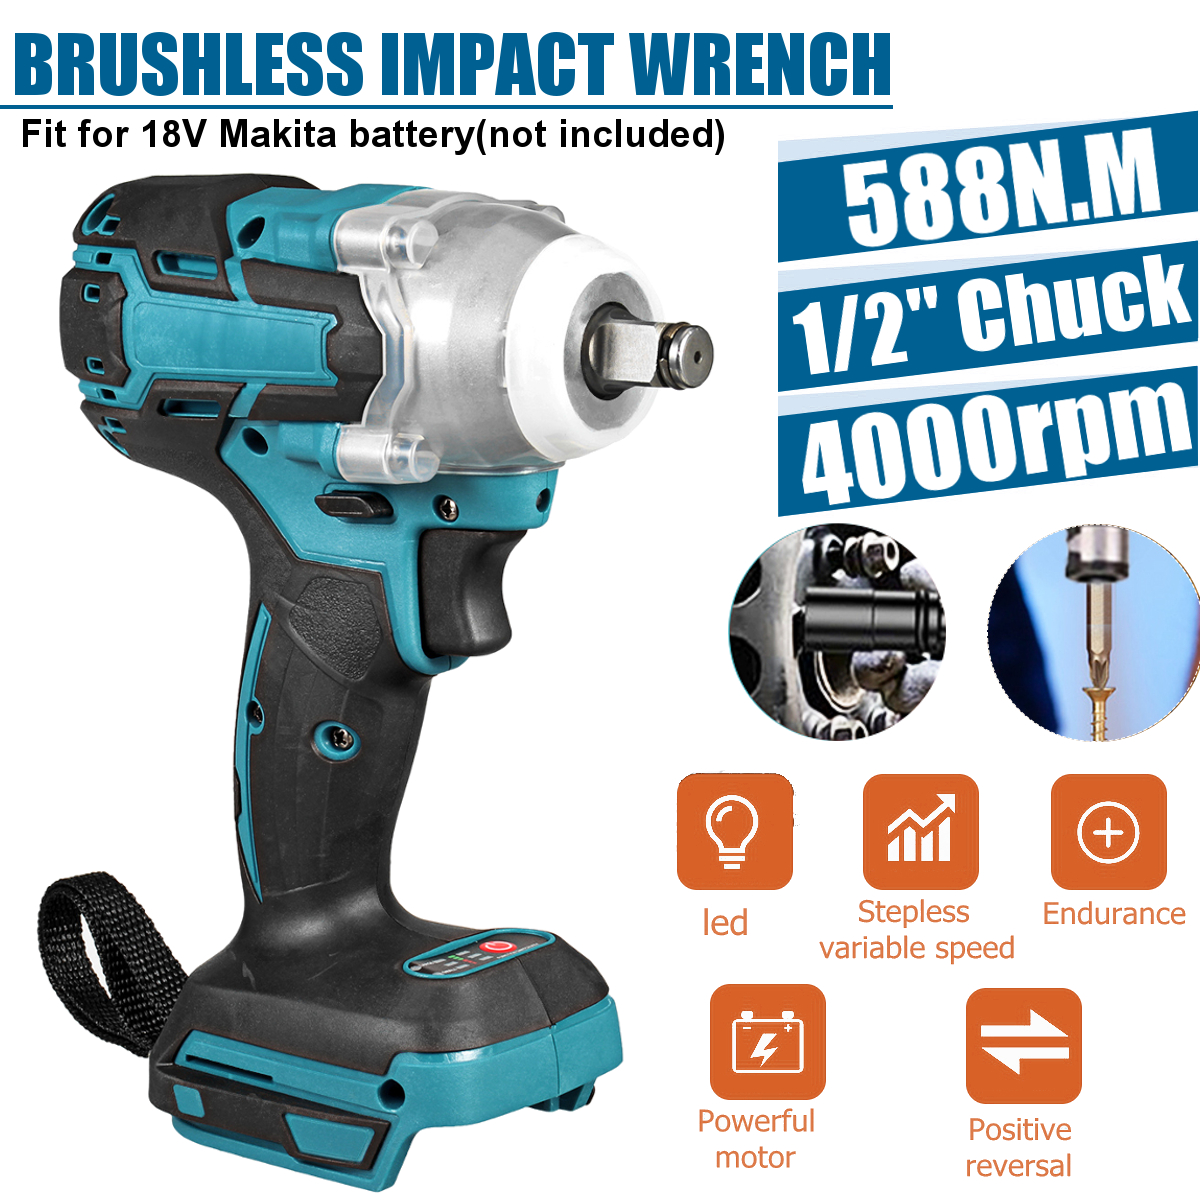 LPLCUICAN 18V 588Nm Electric Impact Wrench Driver Cordless Brushless Wrench Screwdriver 1/2 Rechargeable Socket Wrench for Makita Battery Color : Orange, Size : Free